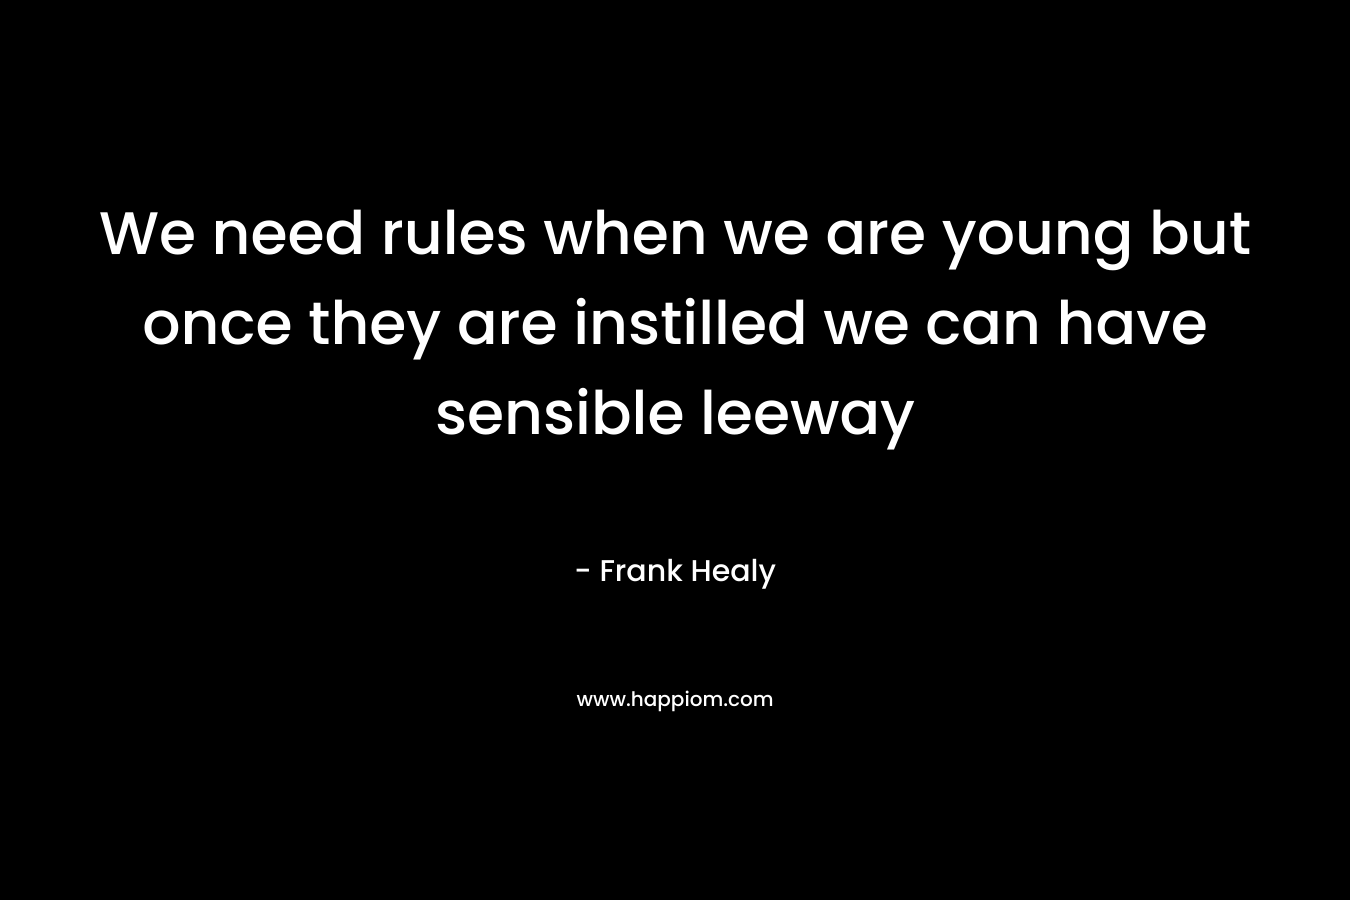 We need rules when we are young but once they are instilled we can have sensible leeway